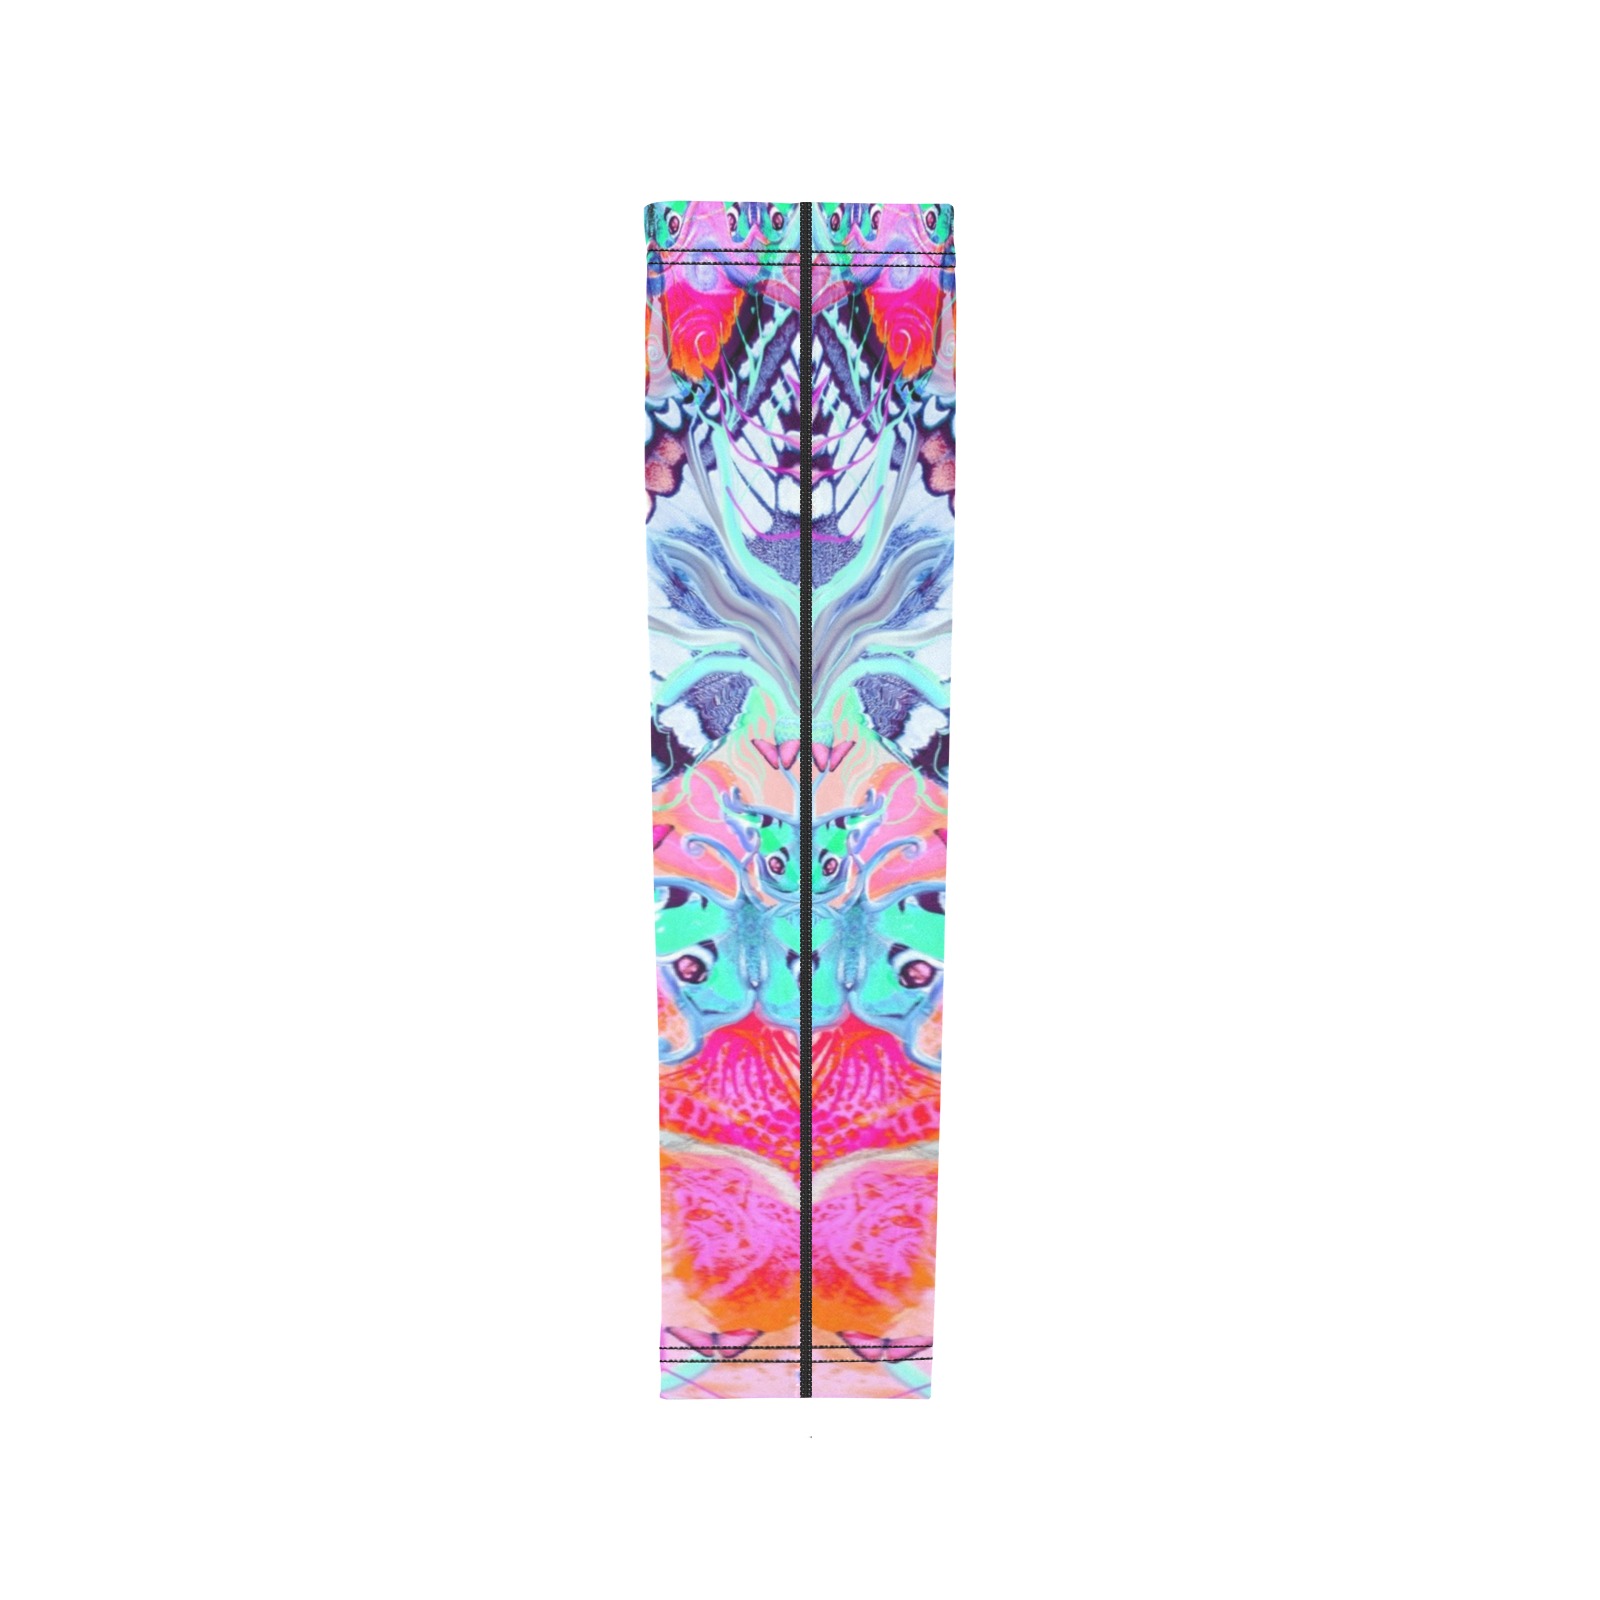 papillons 2-4 Arm Sleeves (Set of Two)